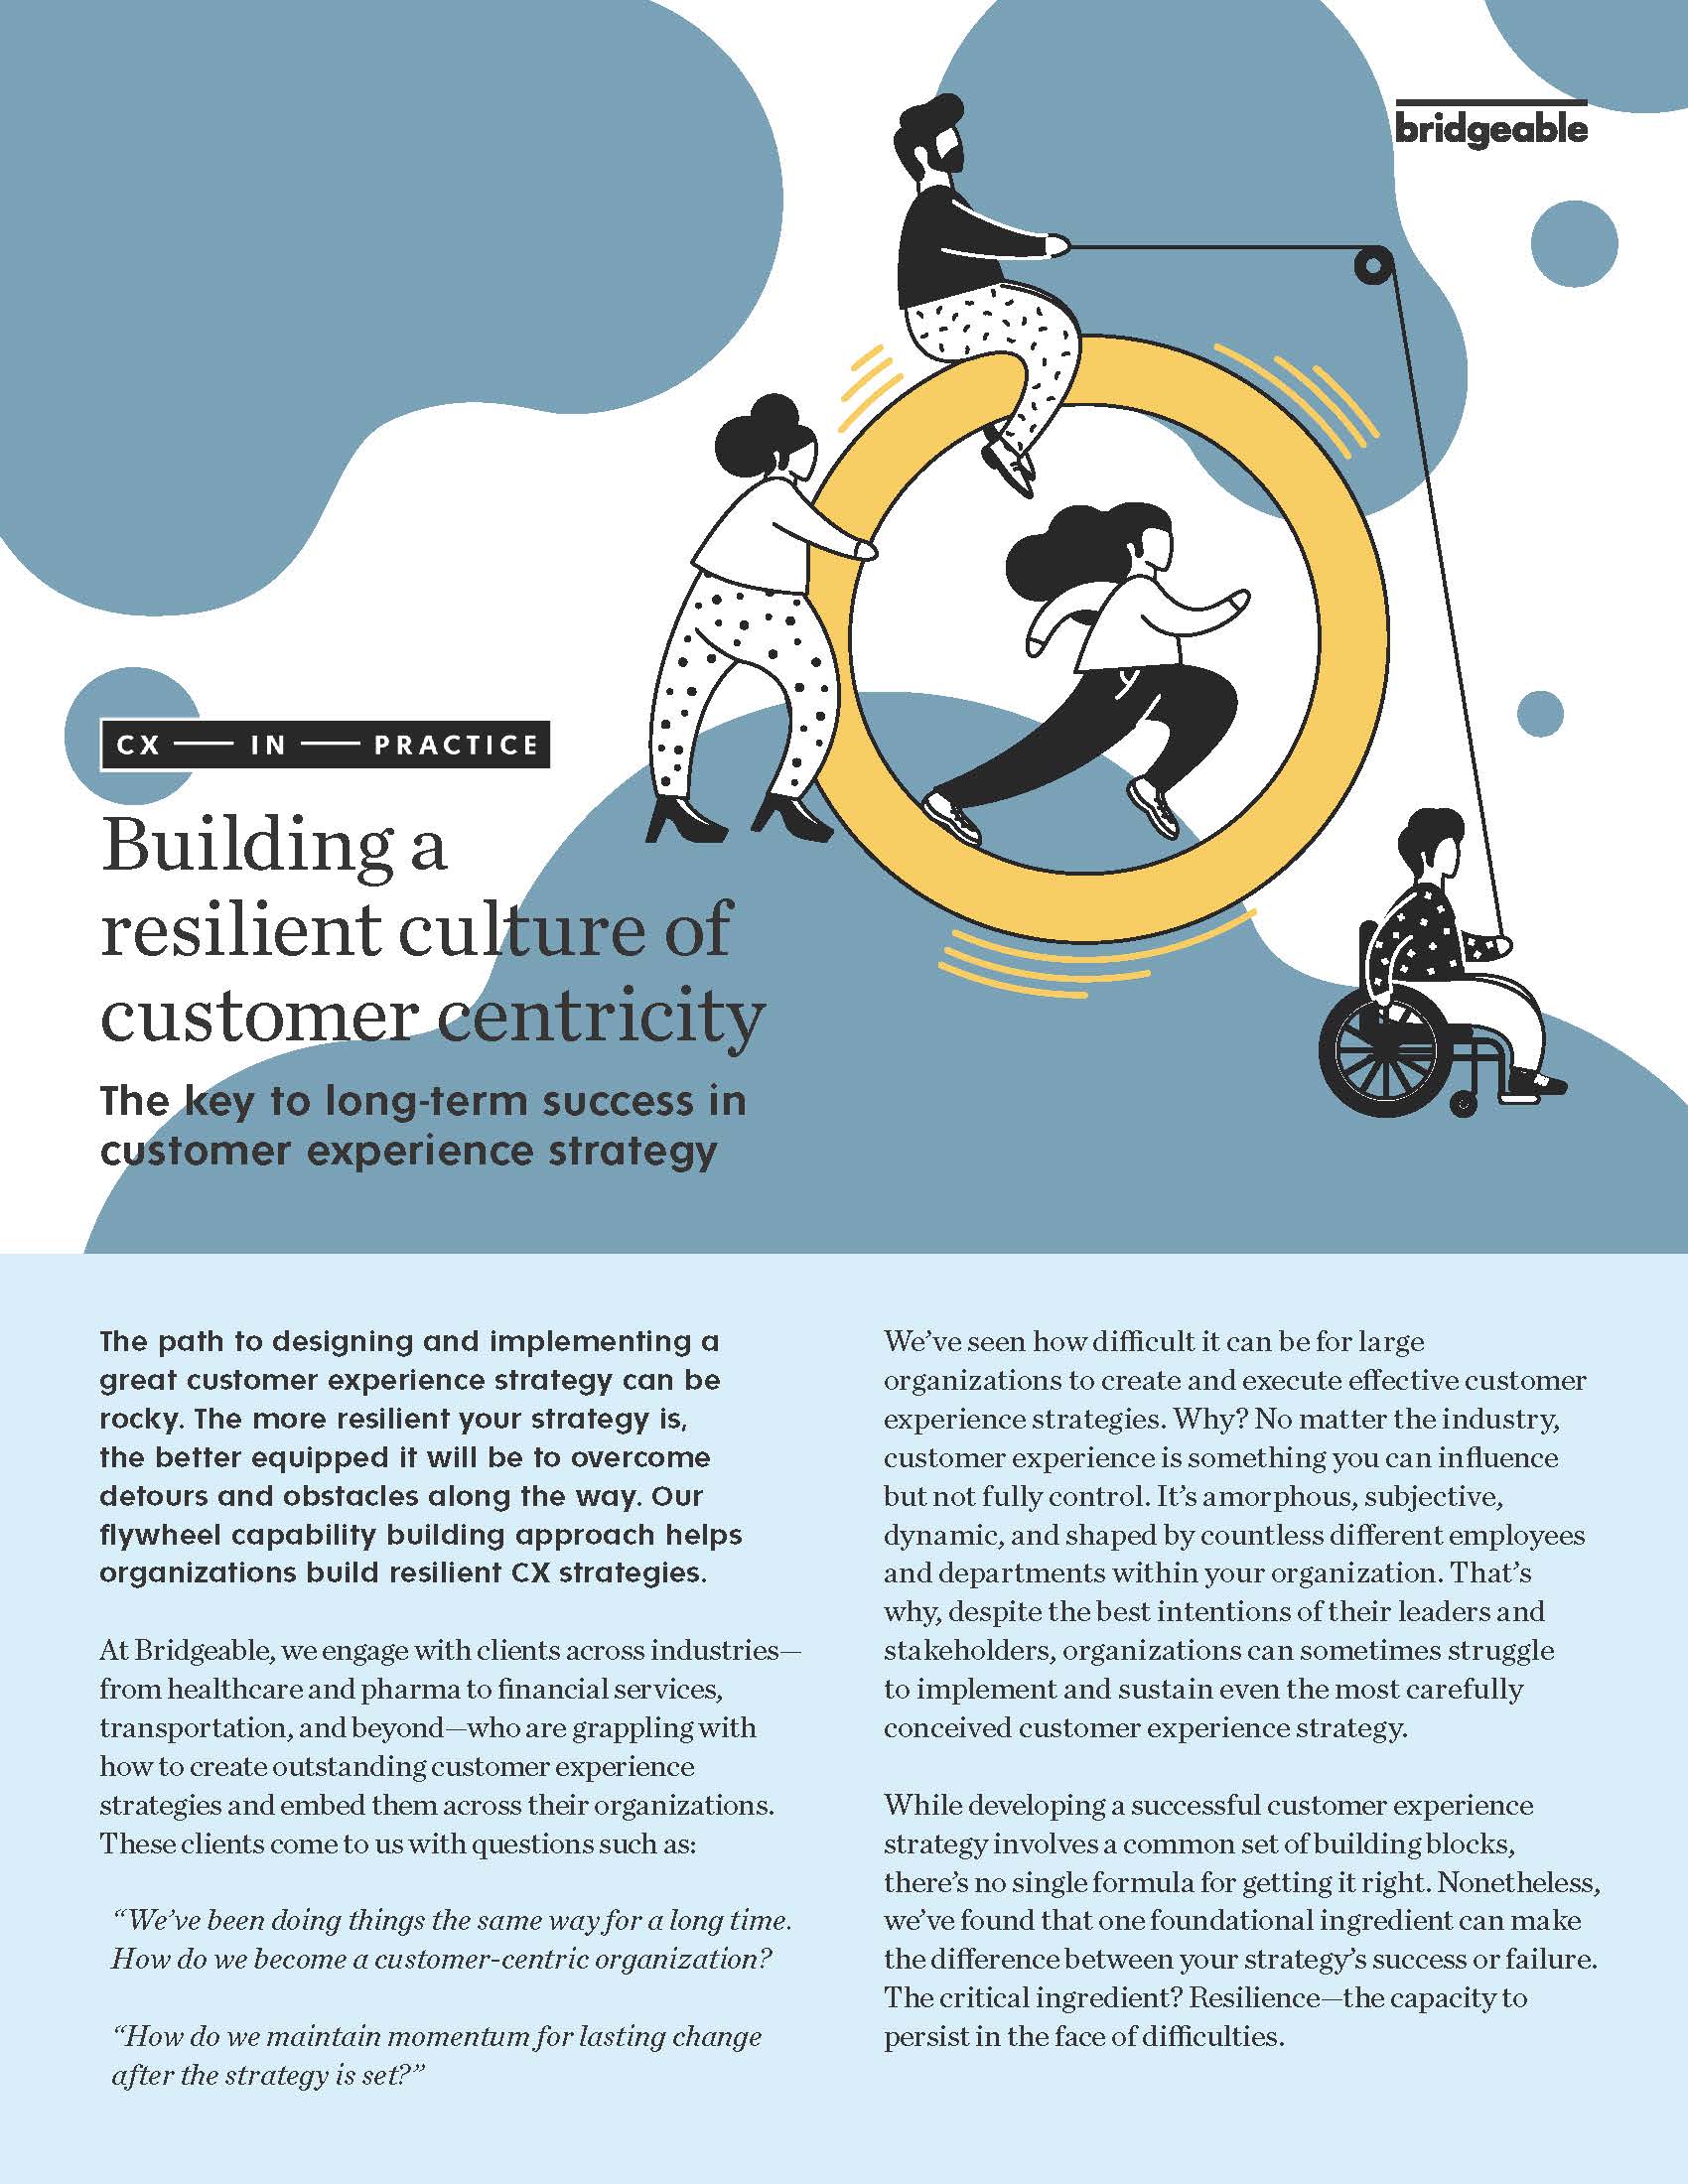 950004__Building a resilient CX strategy_v02_20200117_ay Cover